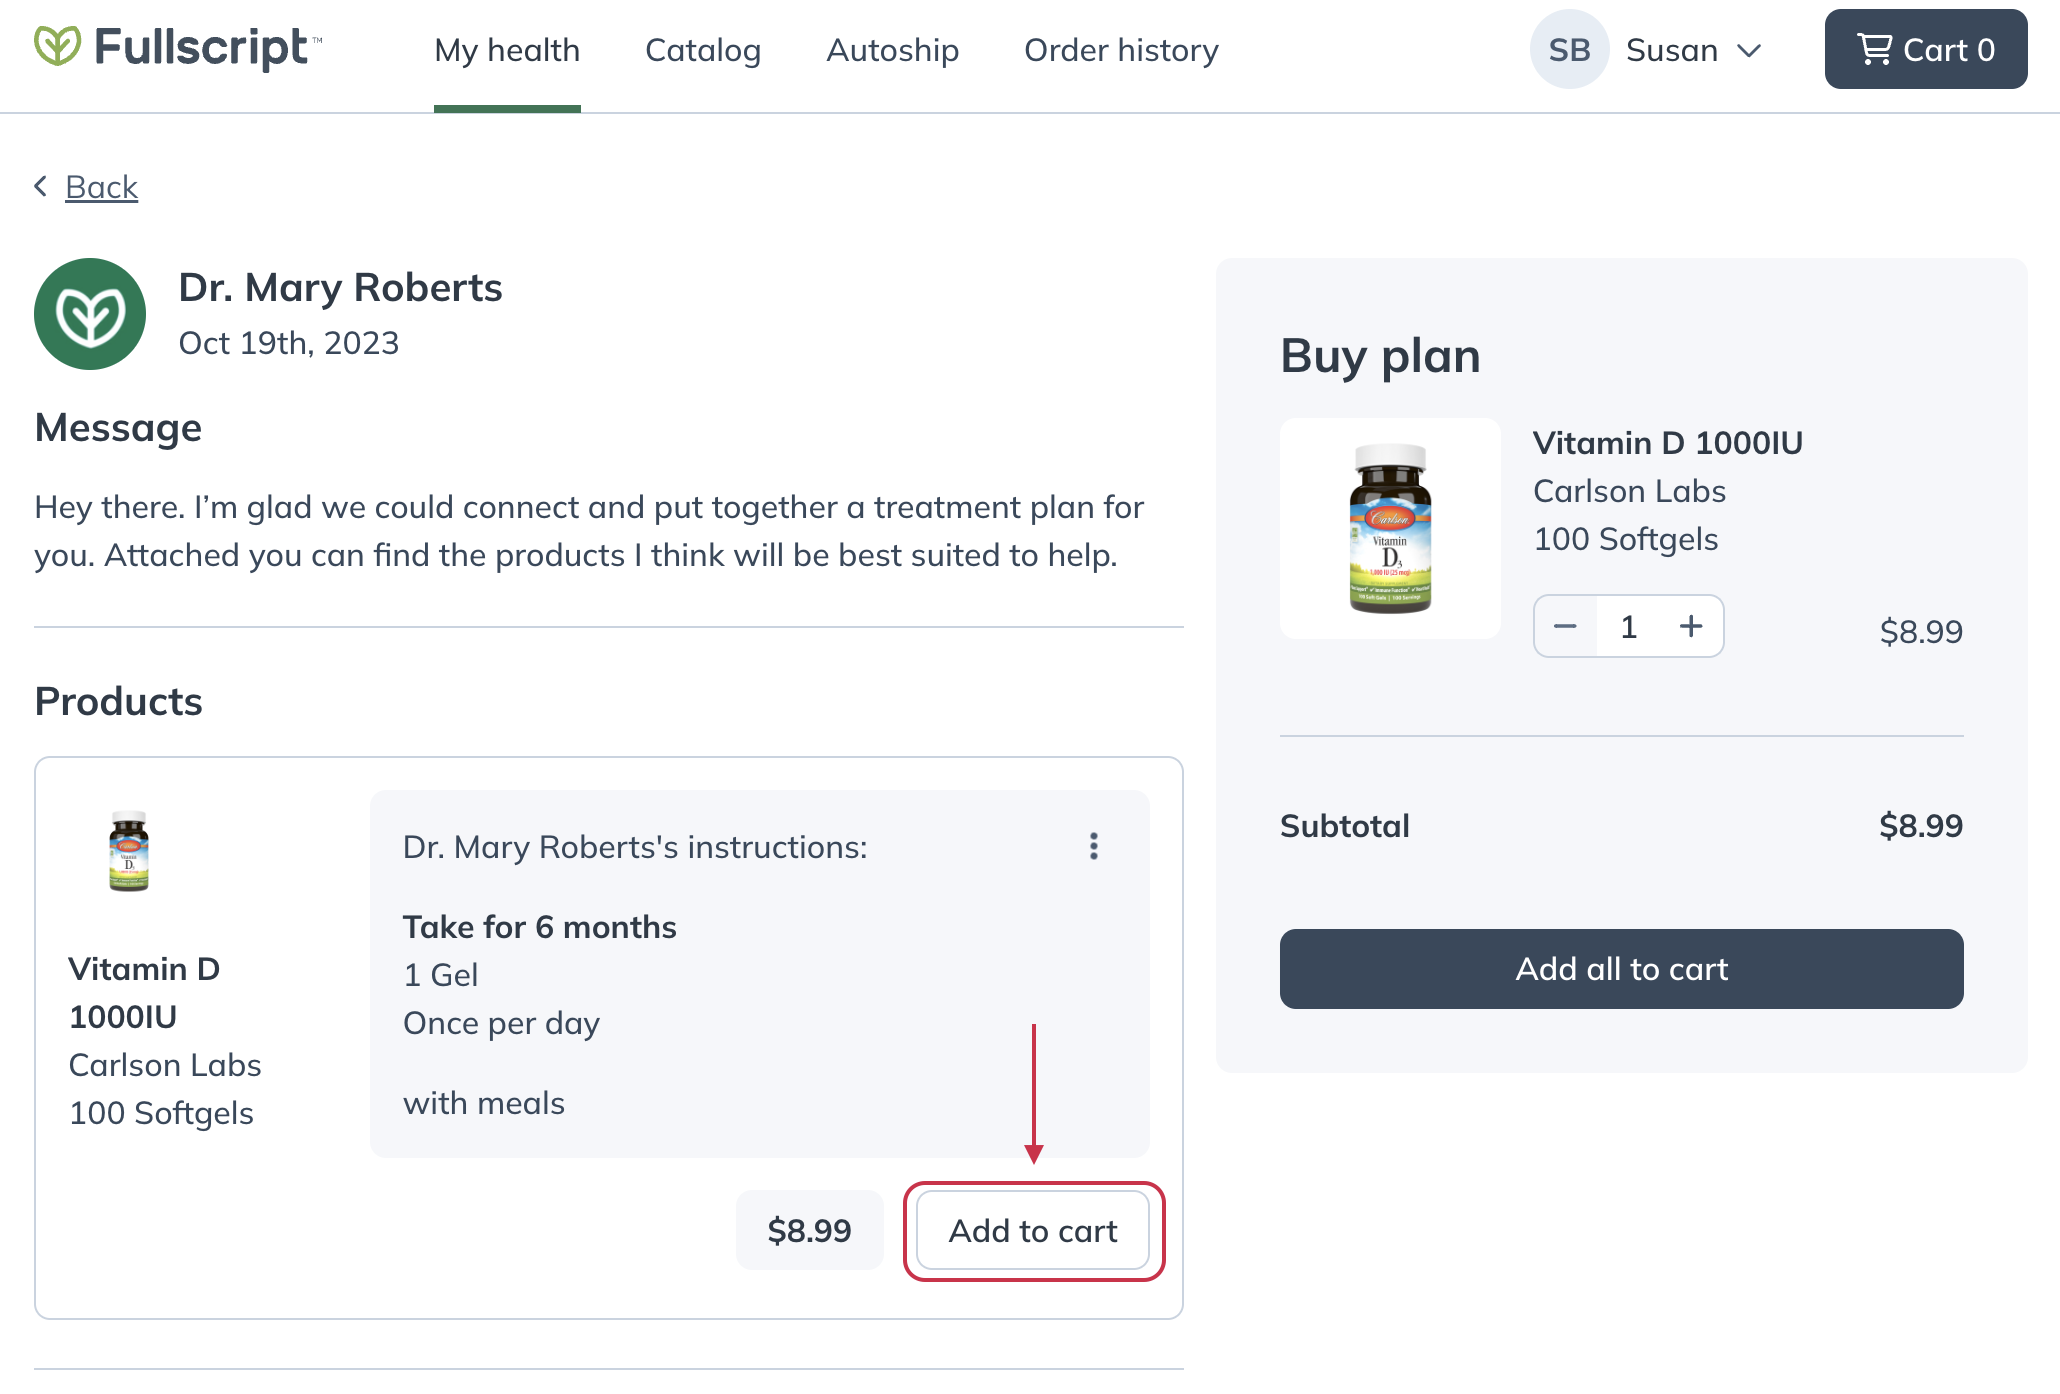 Selecting Add to cart to place a product into your cart